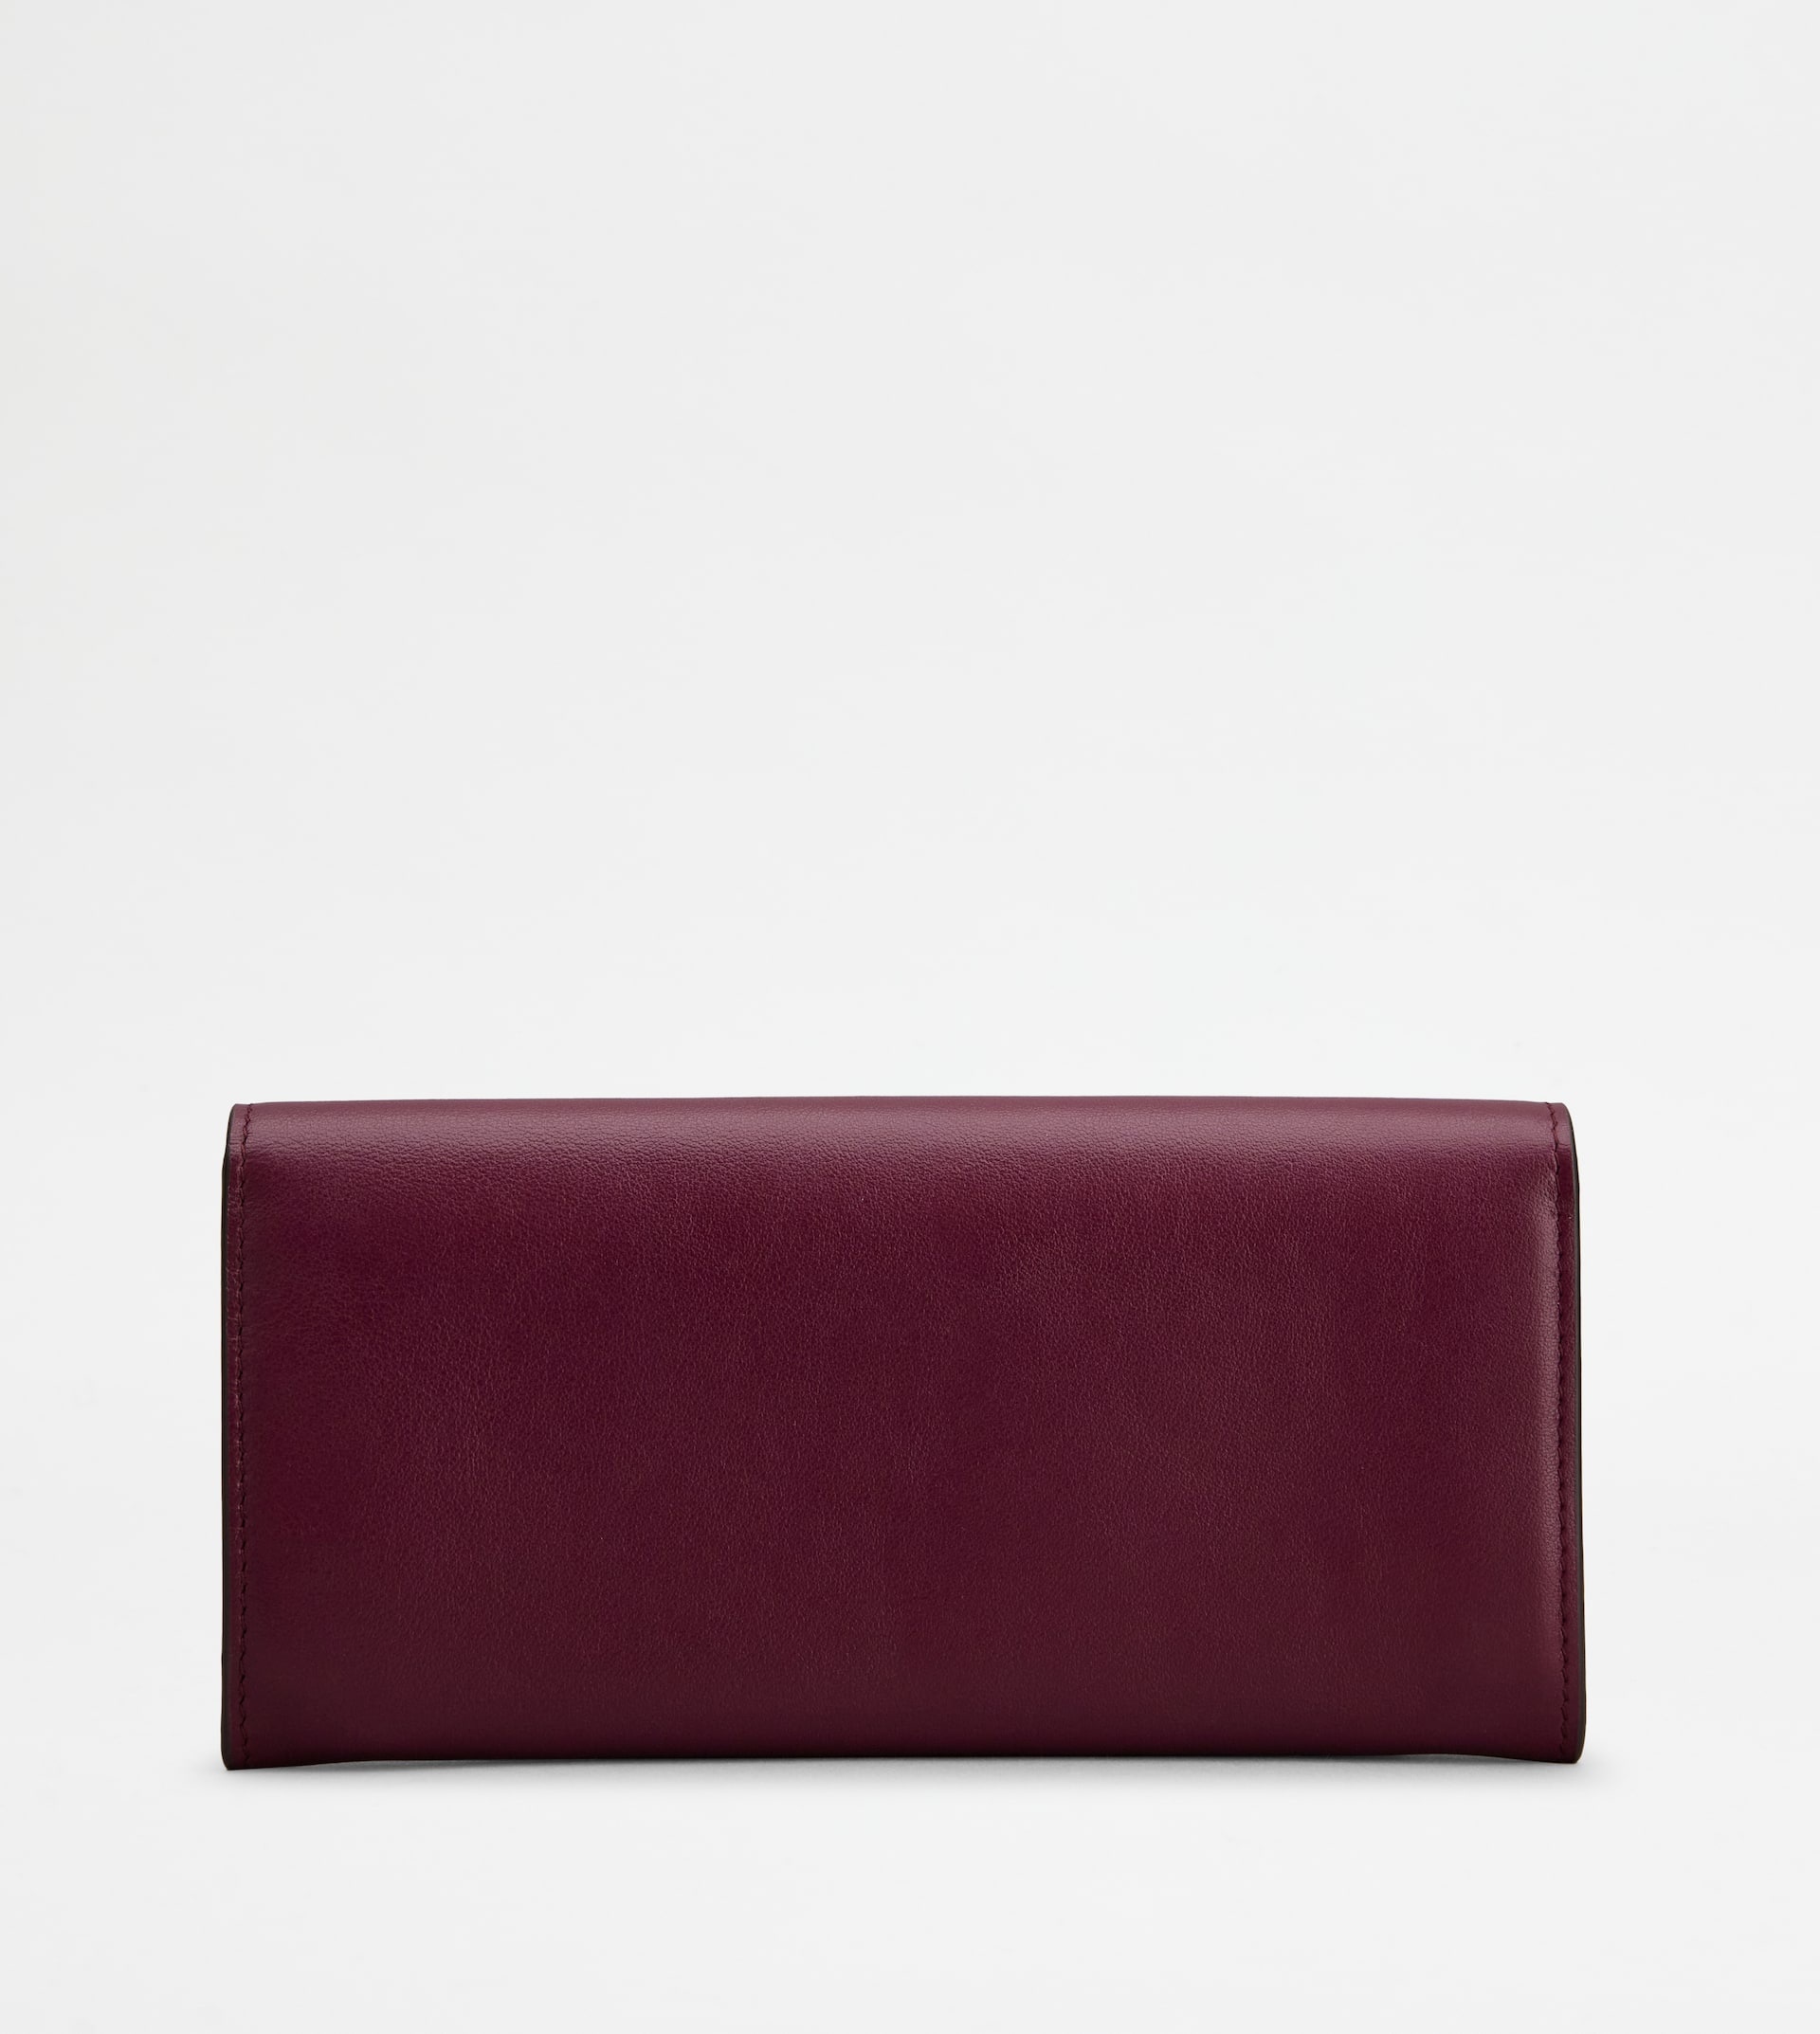 T TIMELESS WALLET IN LEATHER - BURGUNDY - 3